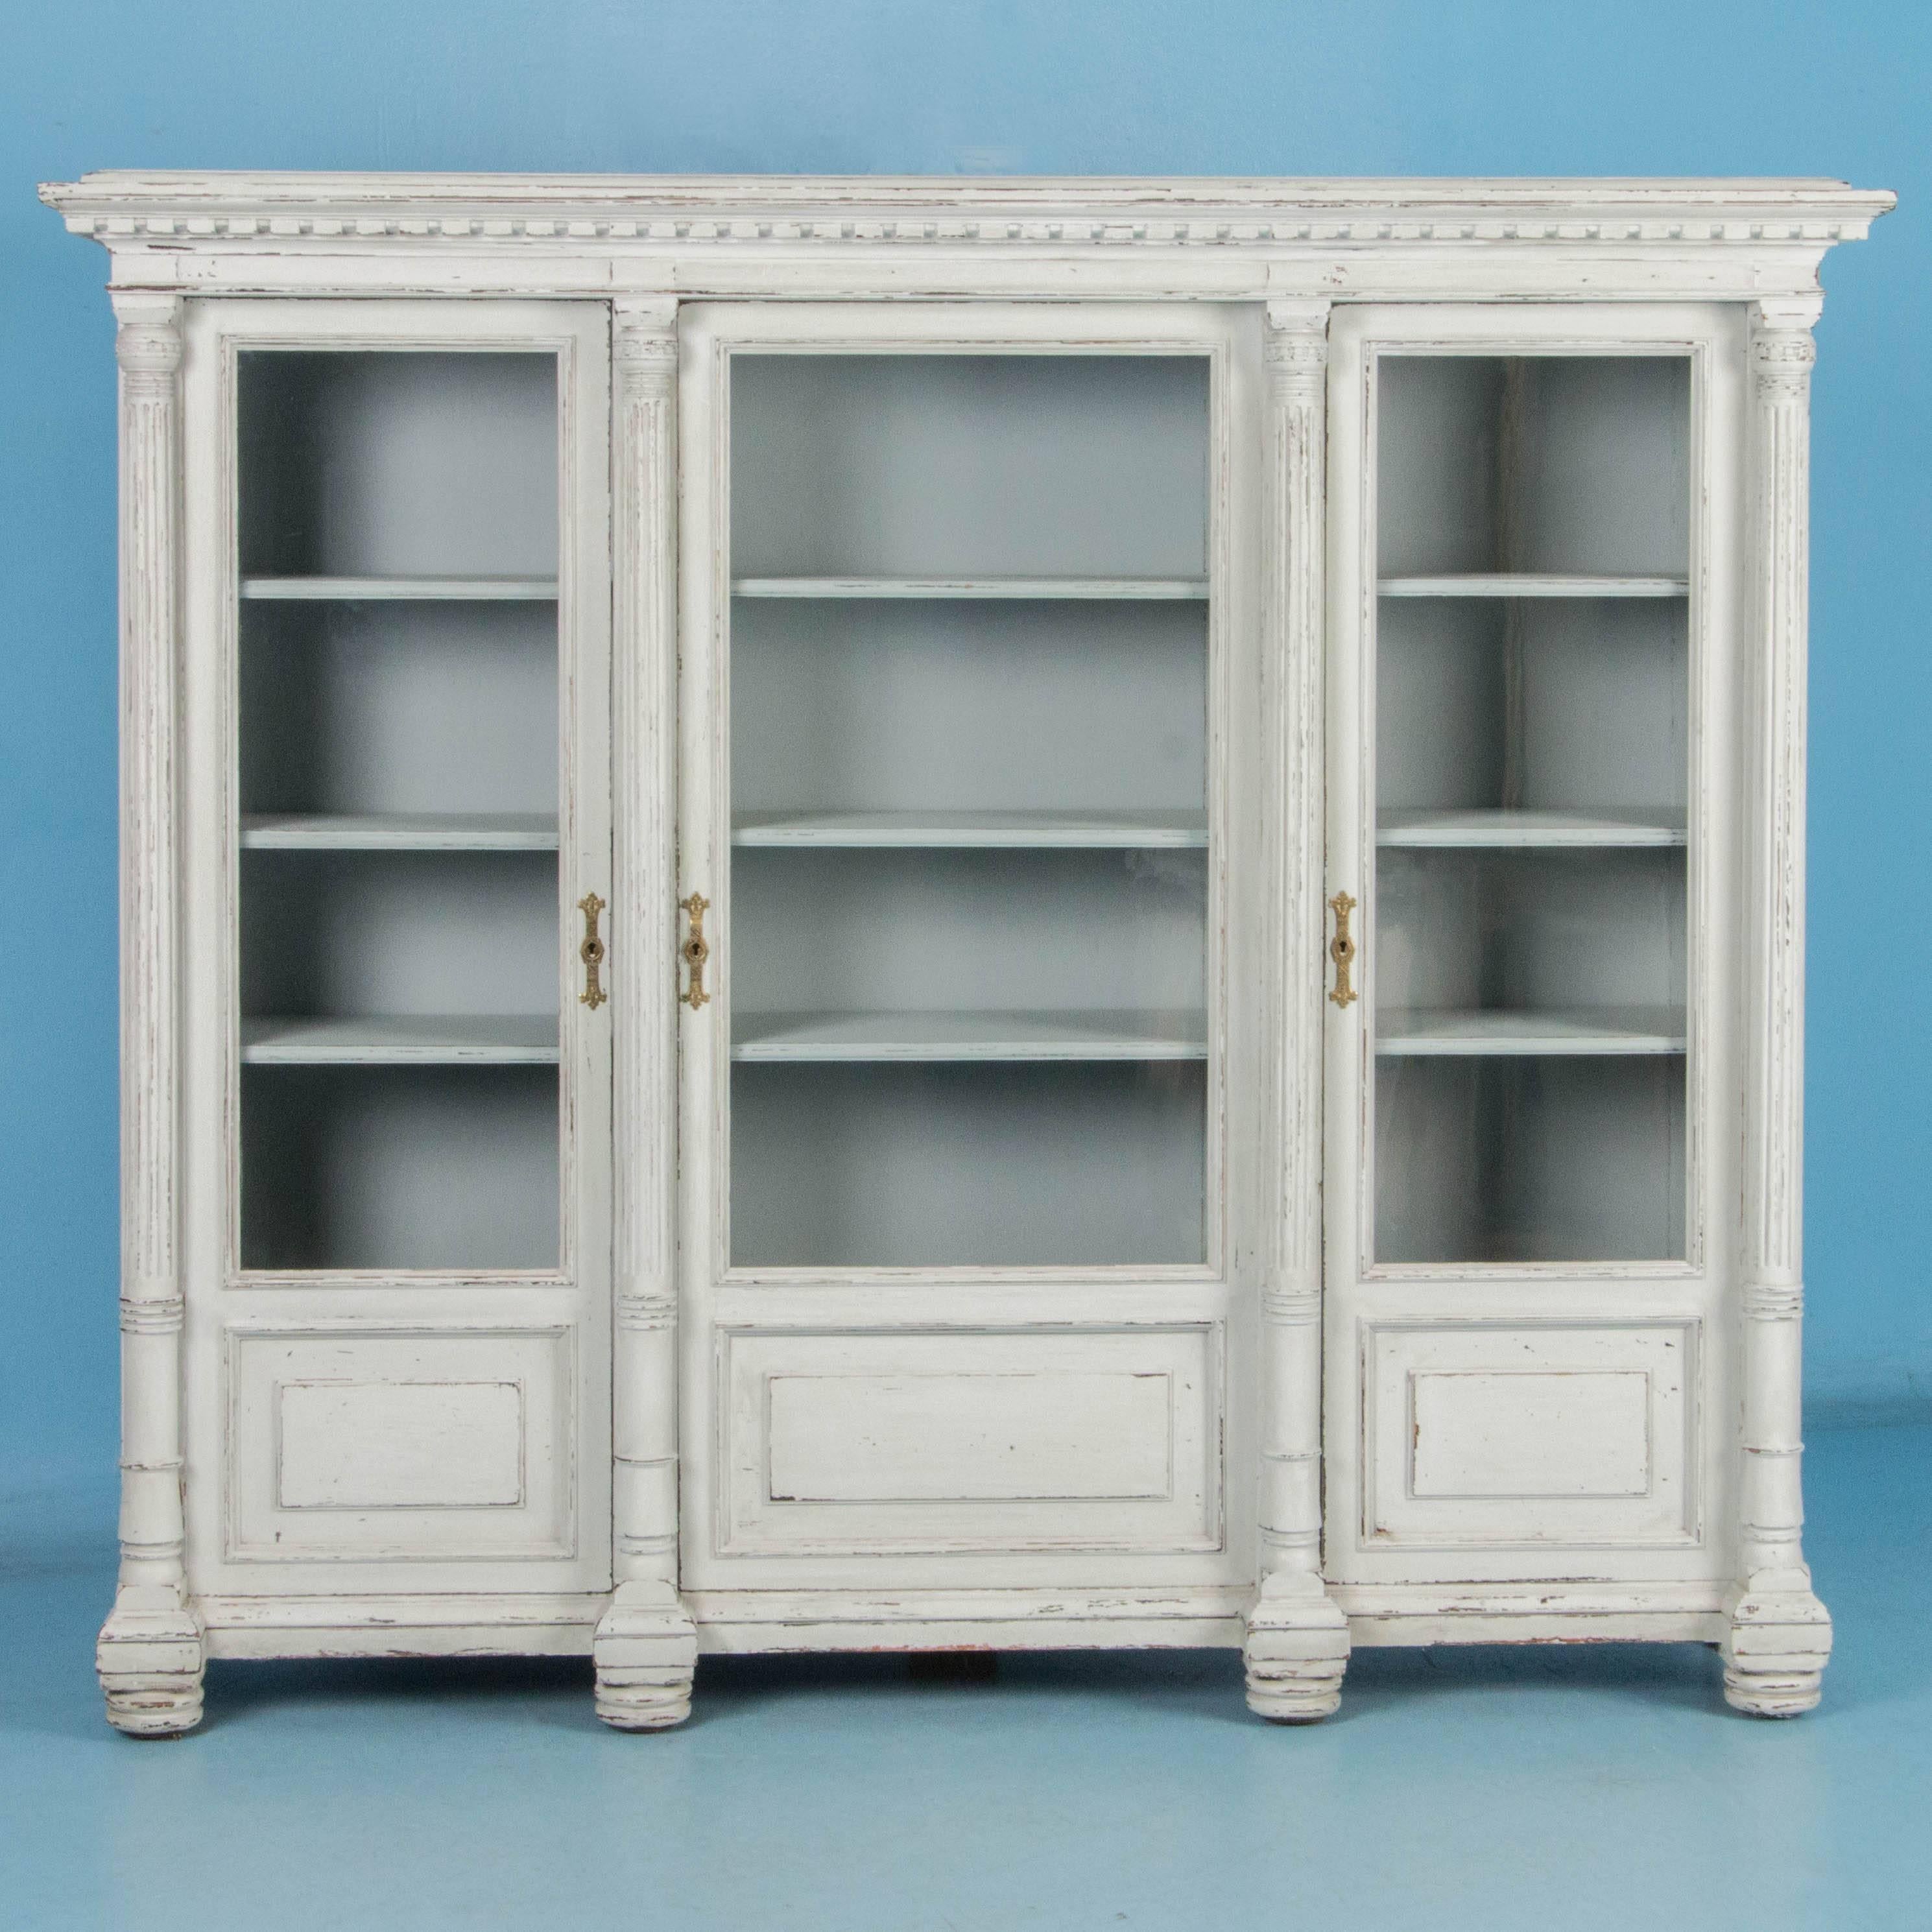 This large antique Swedish oak bookcase (circa 1890s) features dentil molding, fluted columns and panelled doors in a neoclassical design. Behind each of the three hinged glass doors are fully adjustable shelves. The newer white paint had a subtle